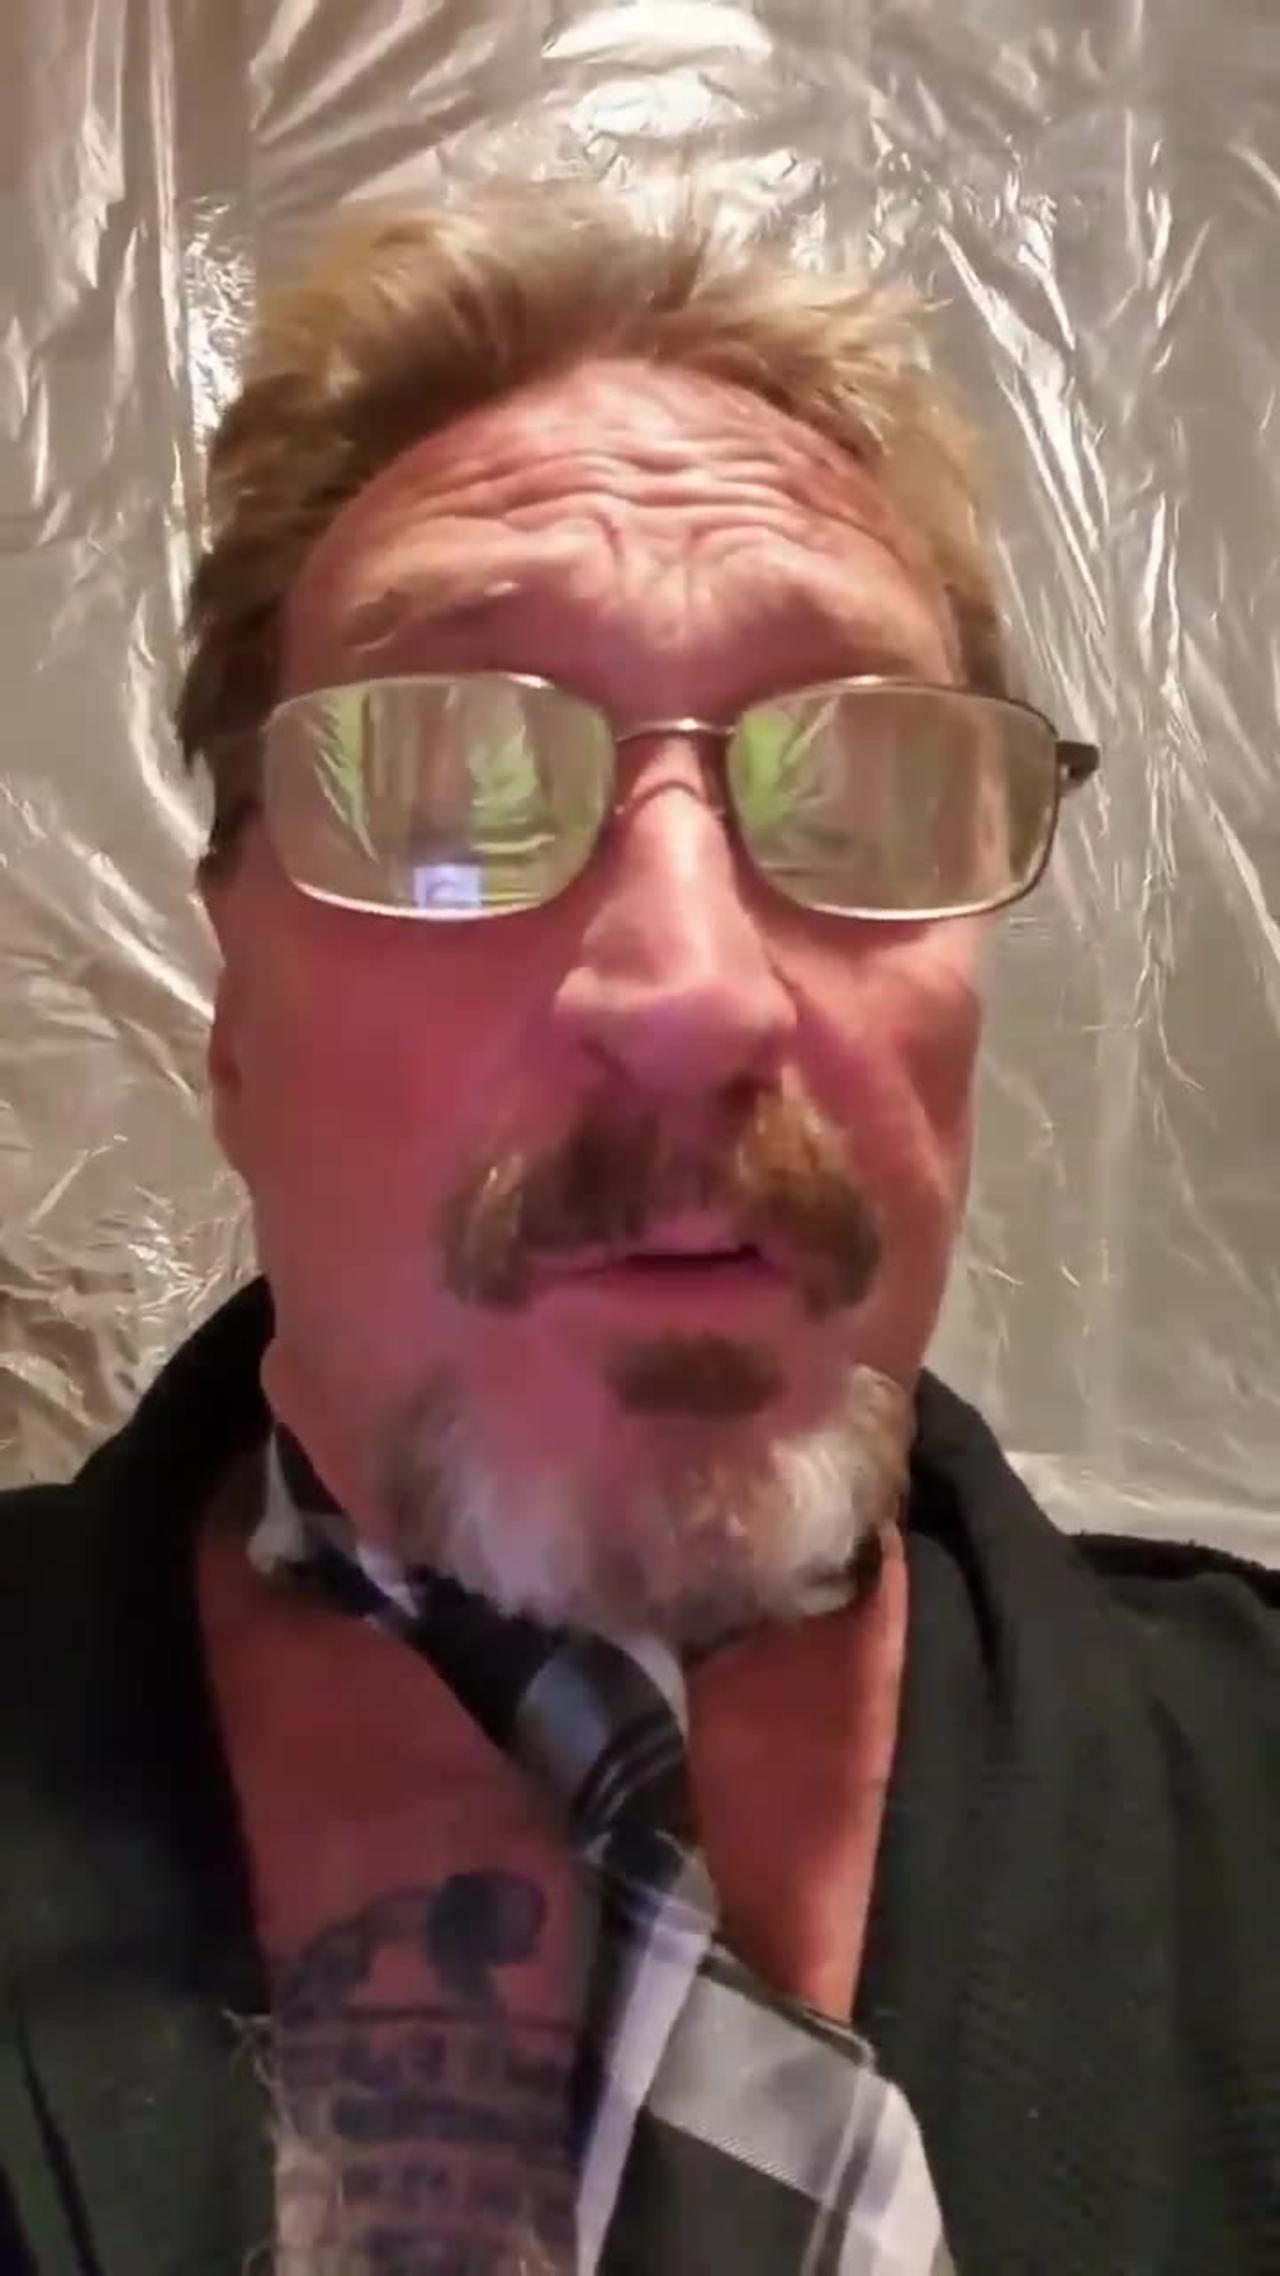 So.......do you all believe that John McAfee is really Dead!!!?